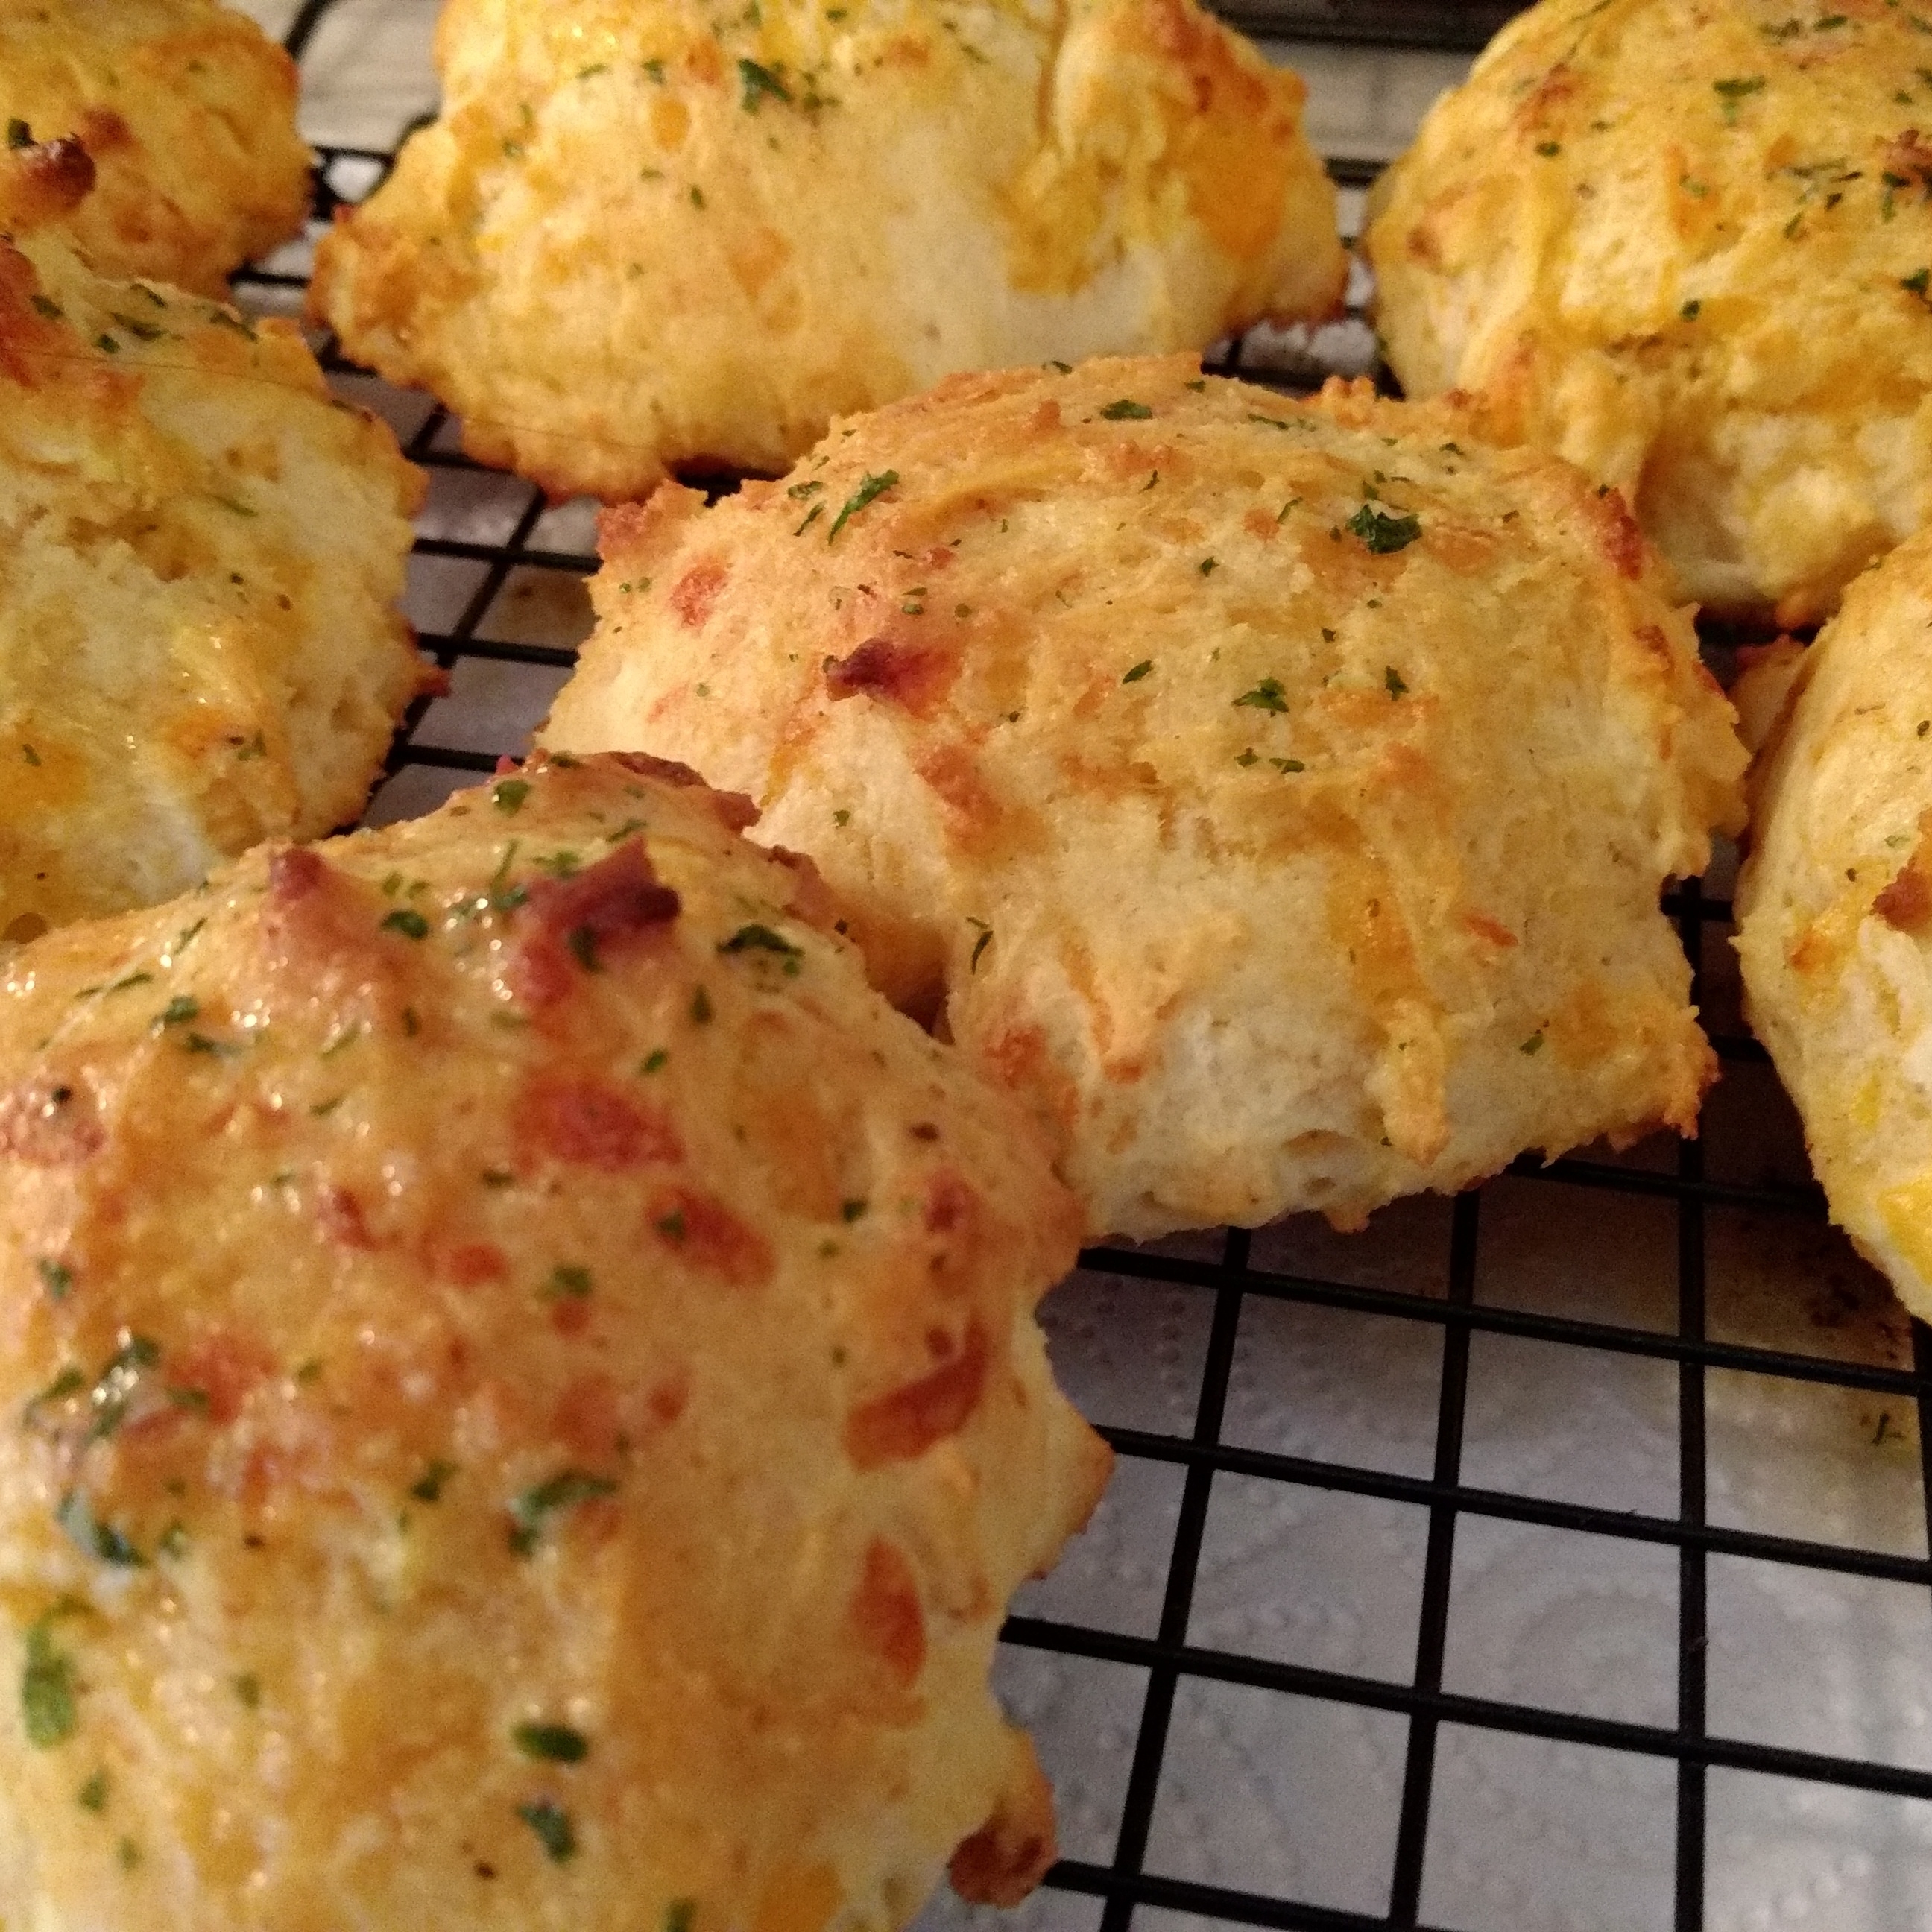 Freshly baked biscuits on a cooling rack, sprinkled with herbs